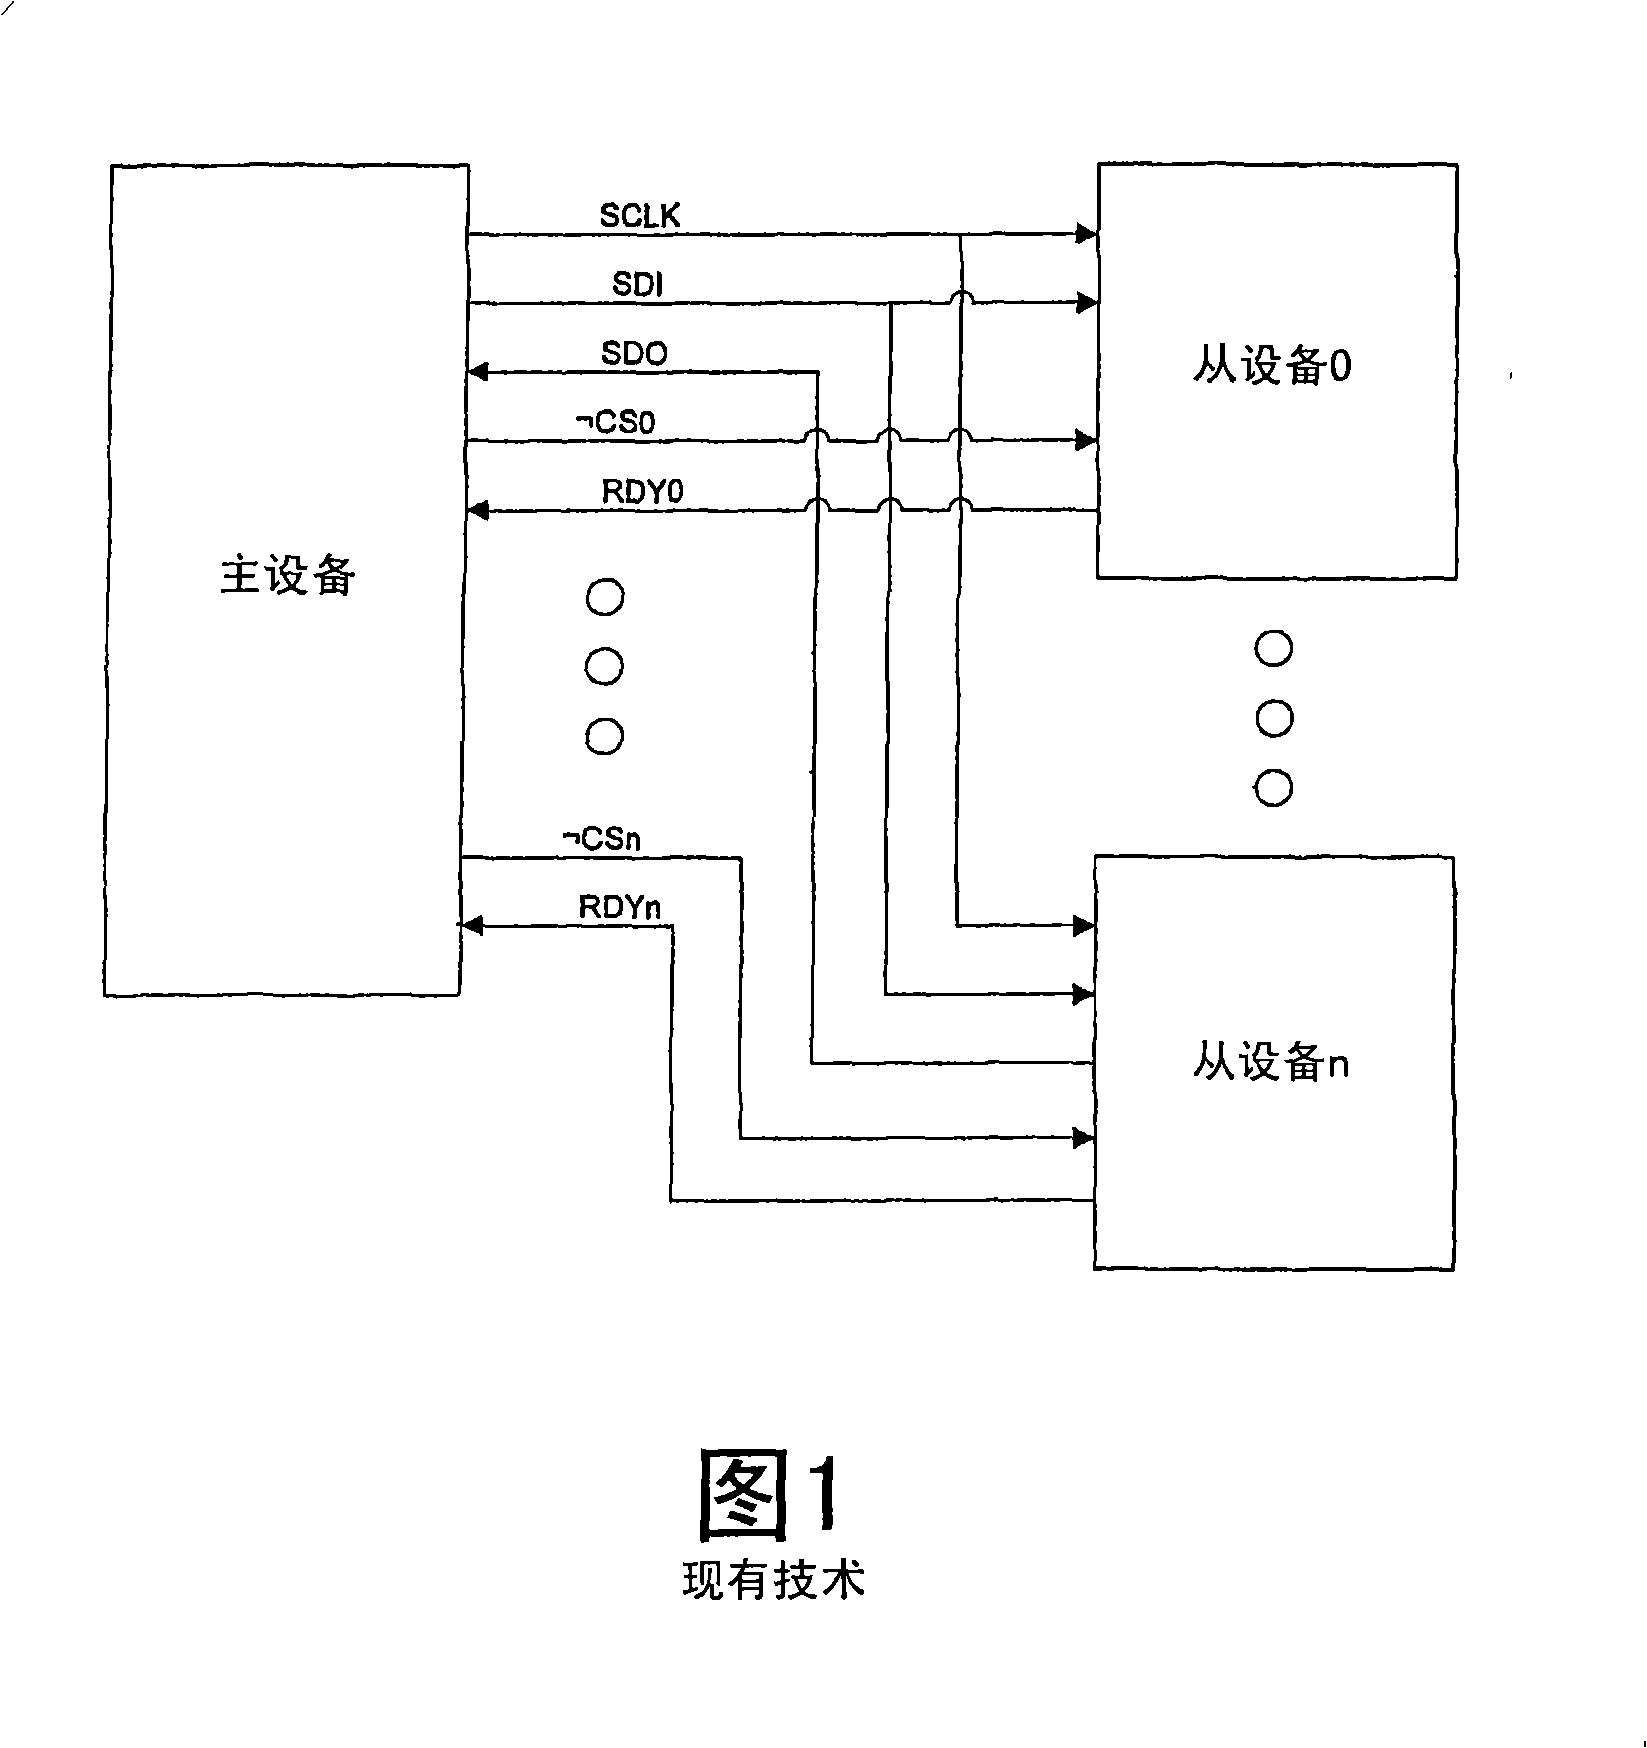 Data structures and circuit for multi-channel data transfers using a serial peripheral interface